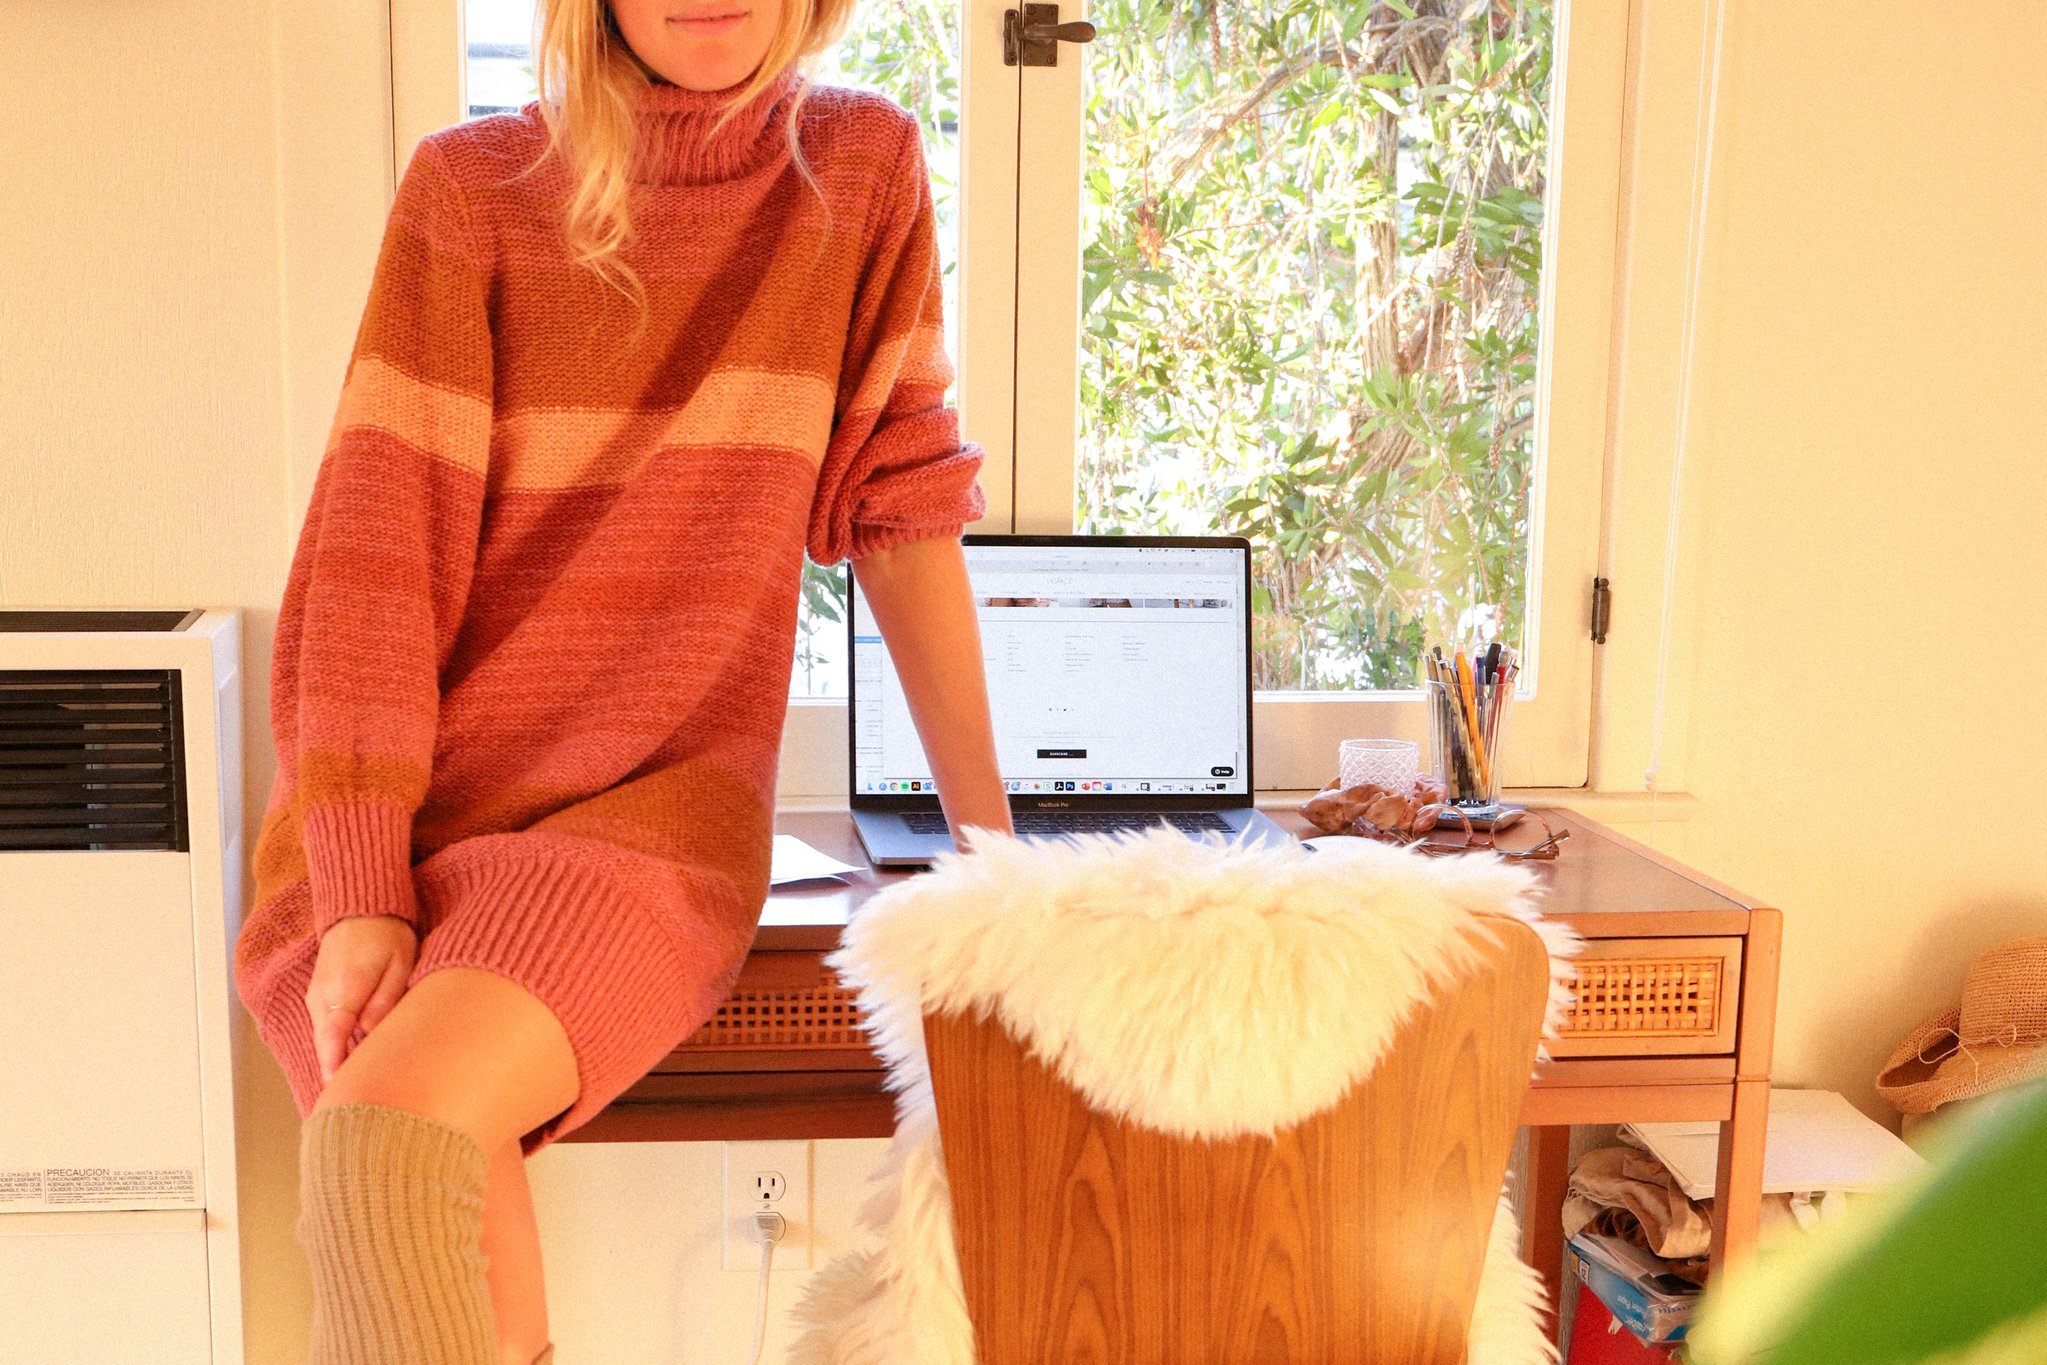 L*Space designer Sunny Robinson in the Jetsetter Sweater Dress